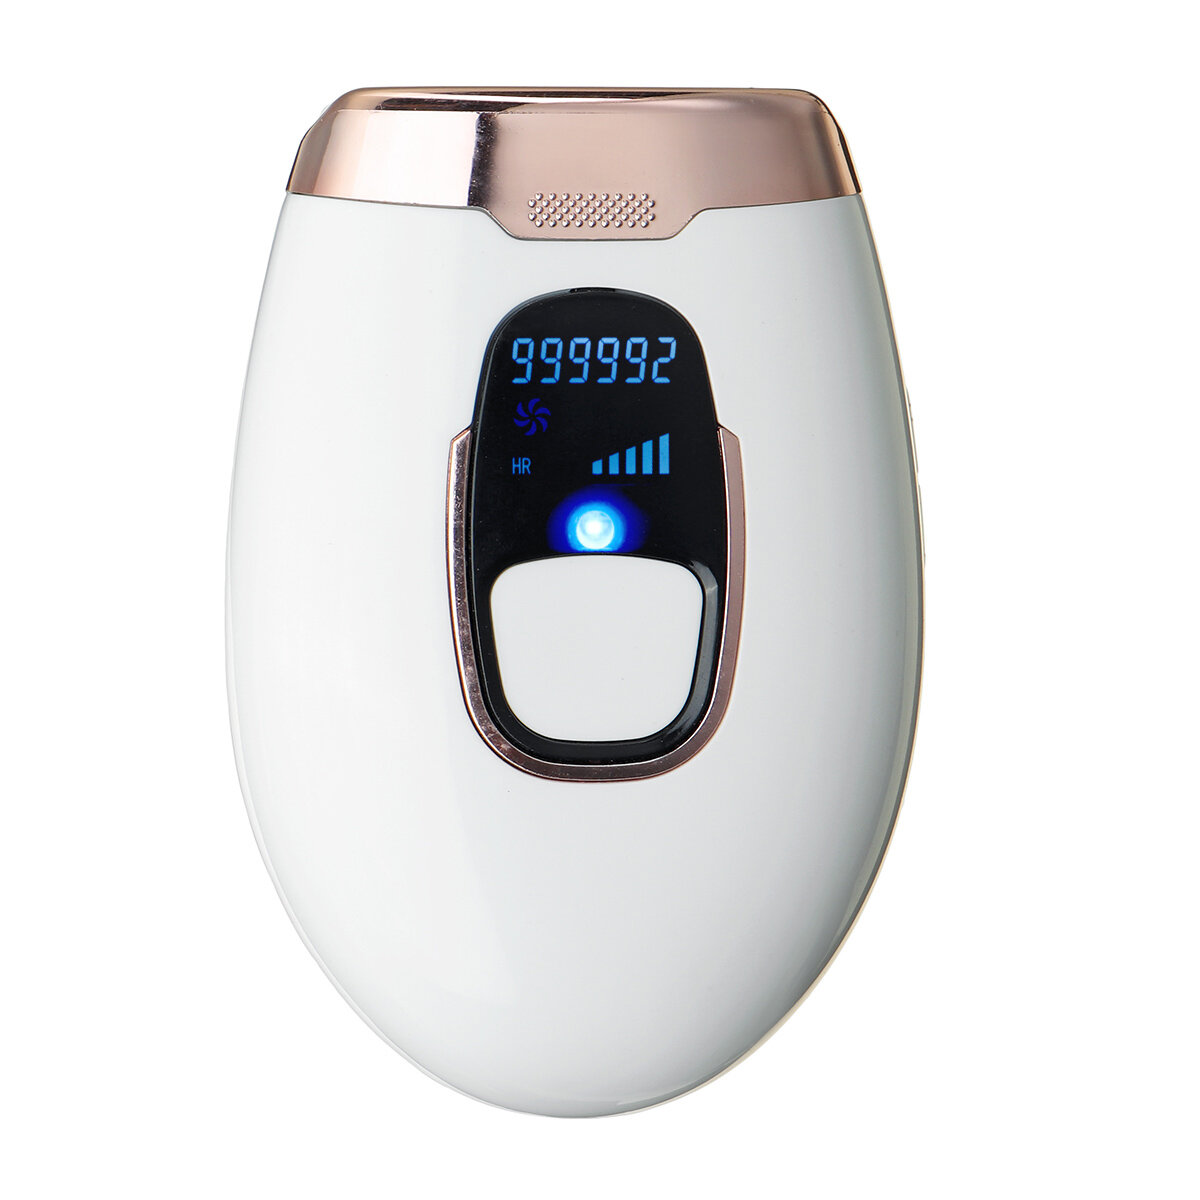 Image of 990000 Flashes IPL Laser Hair Removal Device Permanent LCD Women Painless Whole Body Hair Epilator Bikini Trimmer